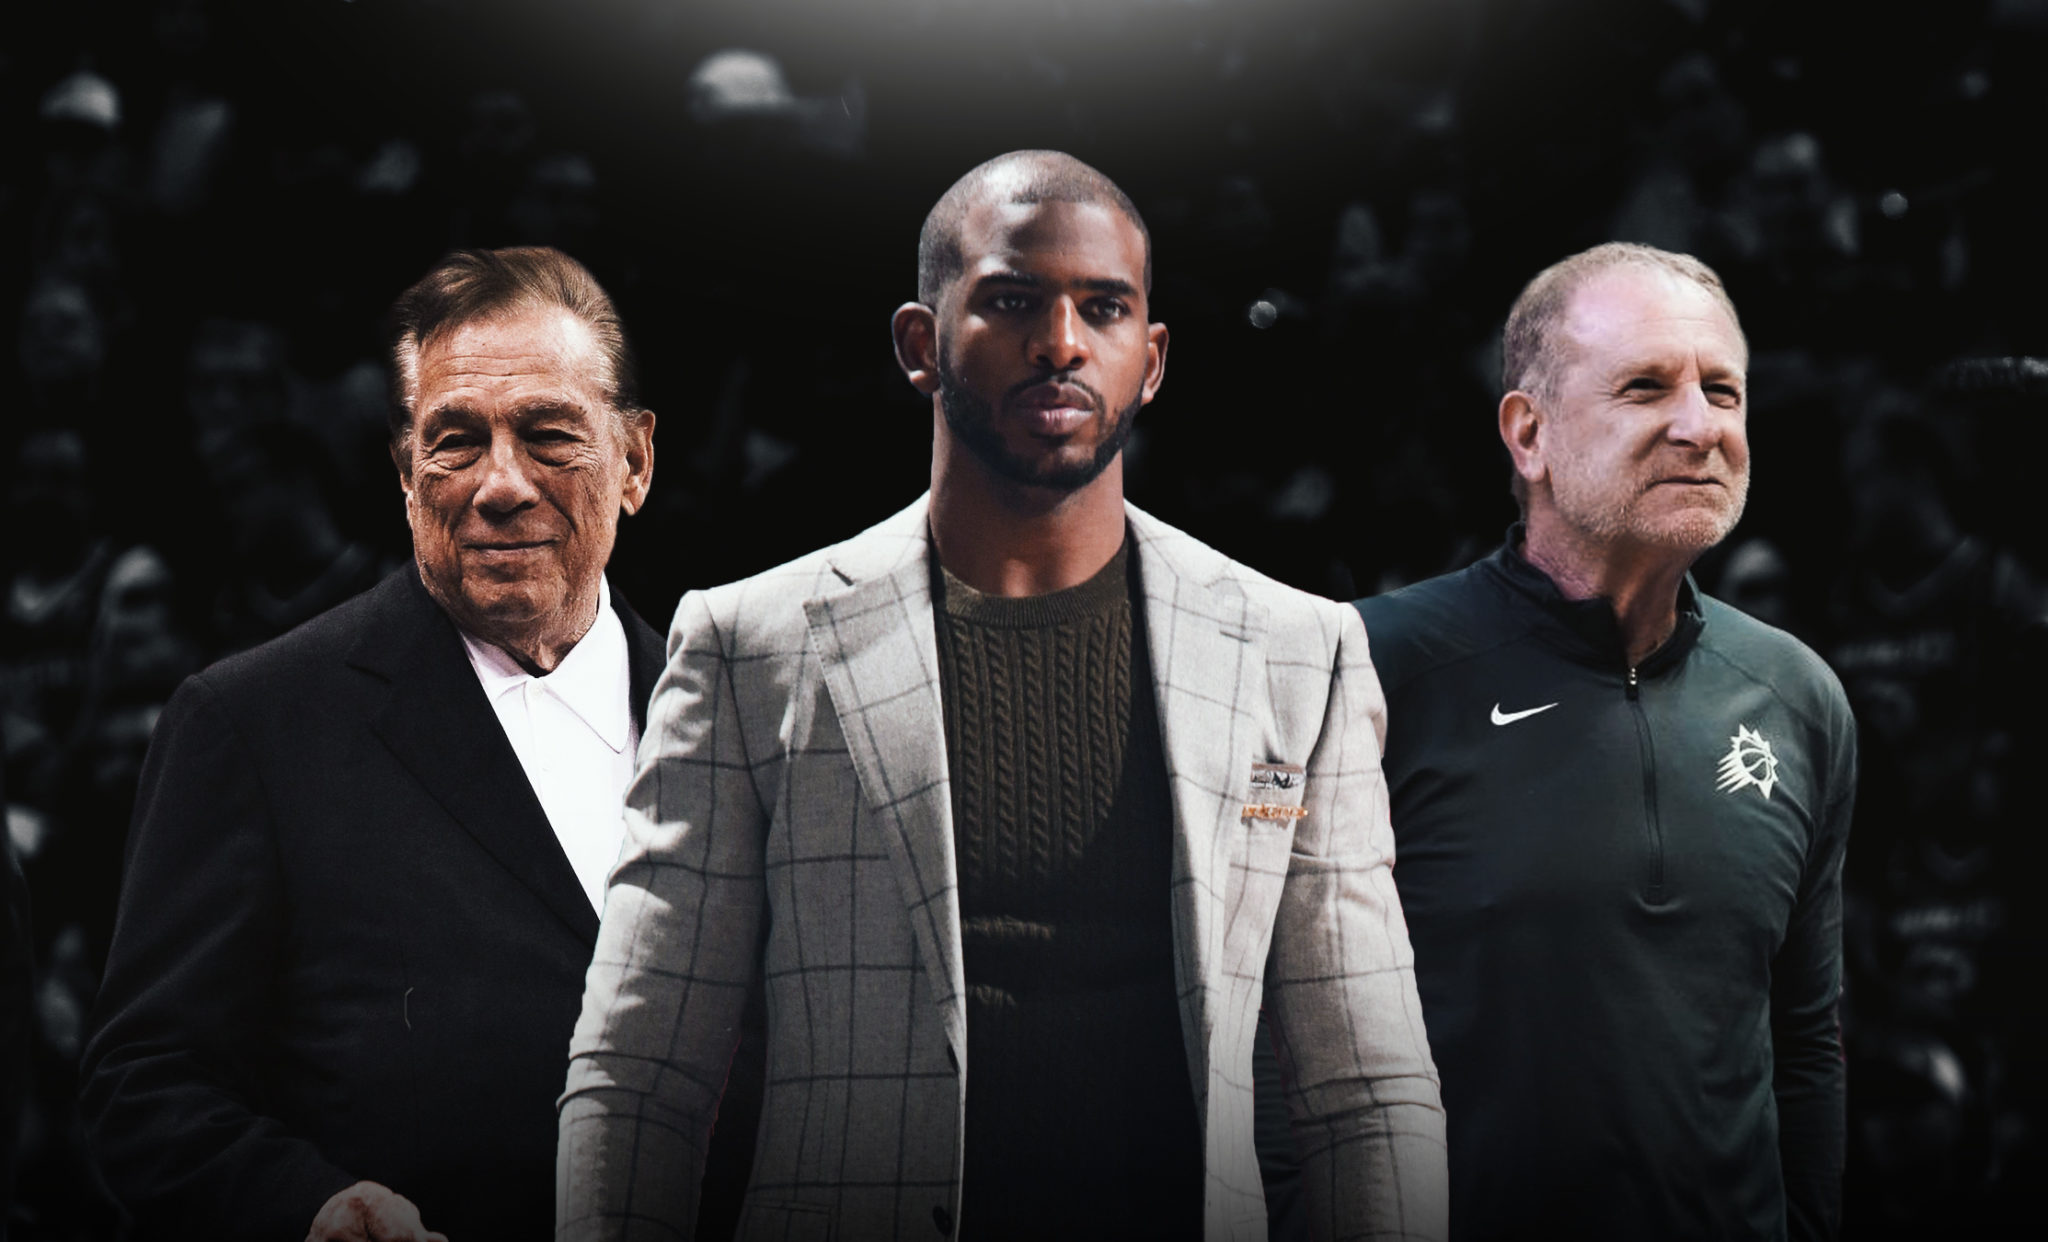 Chris Paul Has Played Under Donald Sterling and Robert Sarver, and He’s Furious Over Latest Scandal